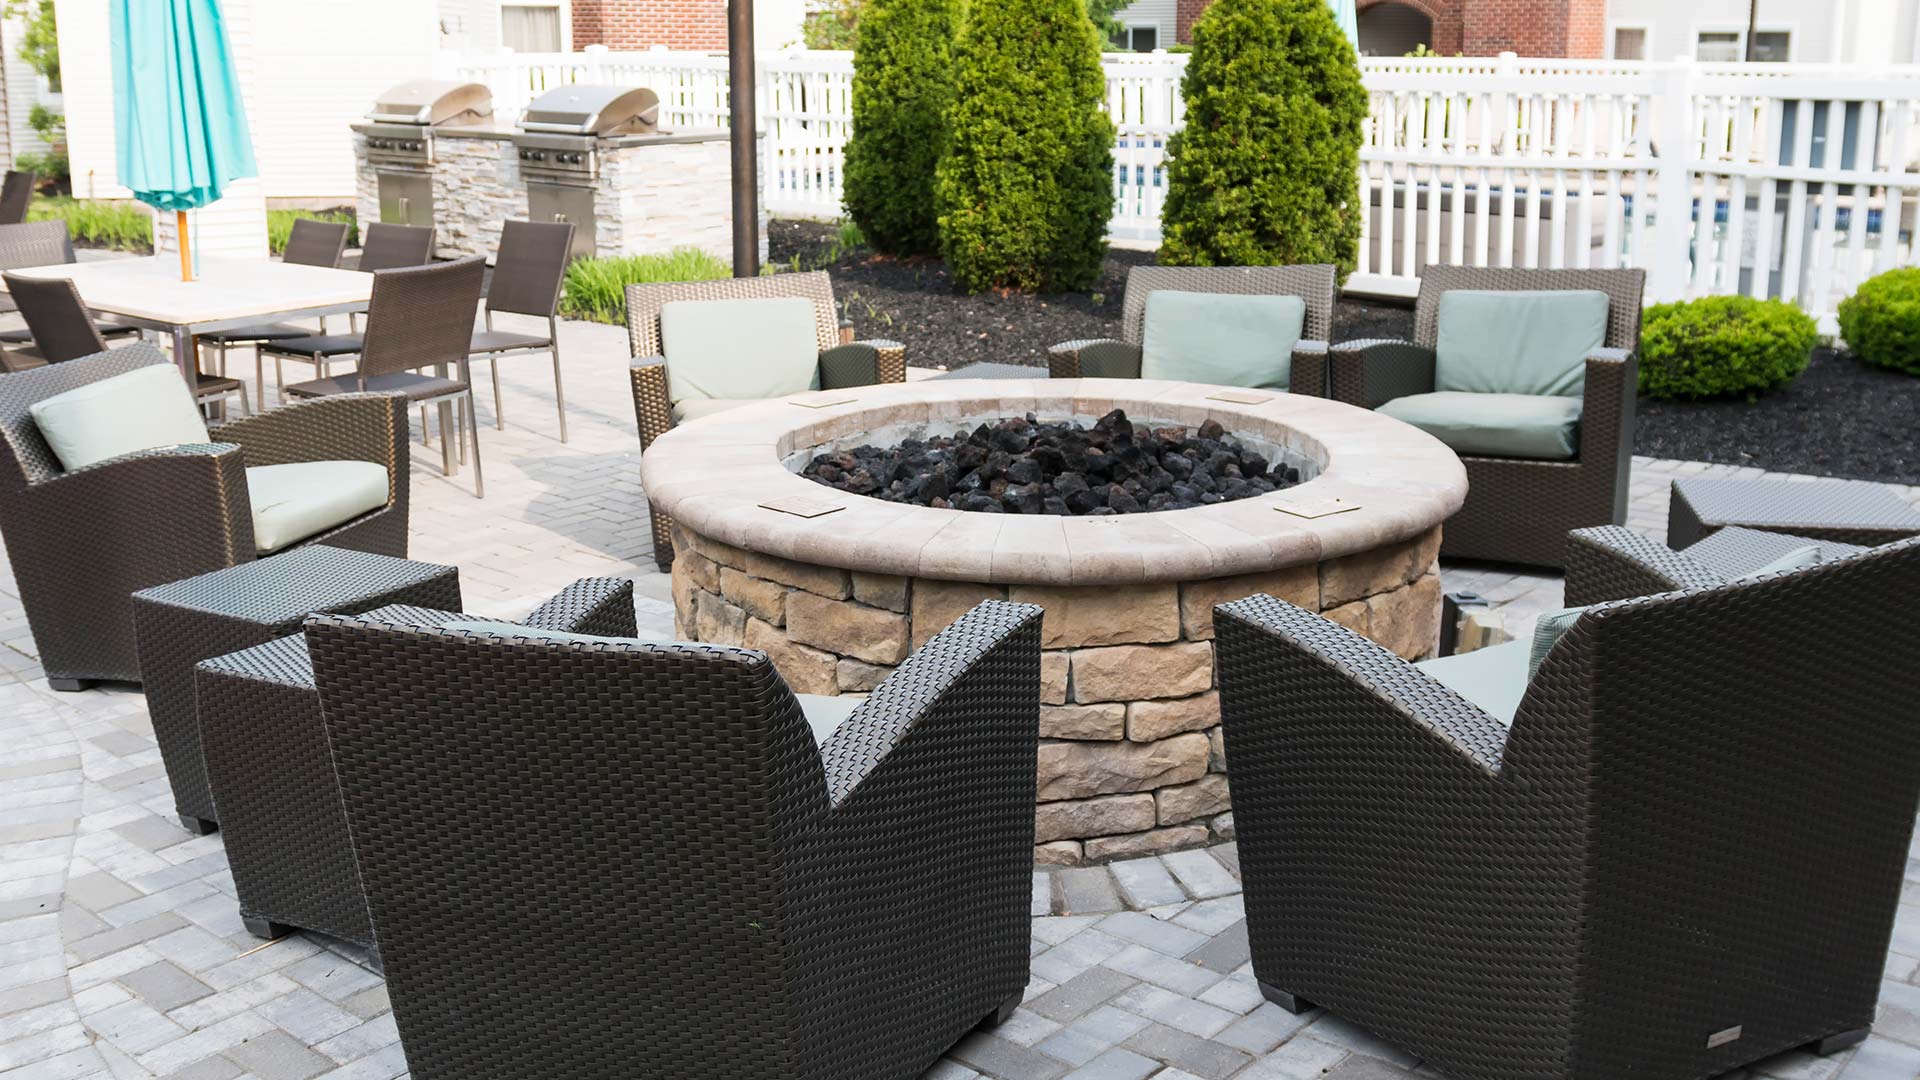 Fire pit on a beautiful patio with great seating and outdoor kitchen near Matthews, NC.